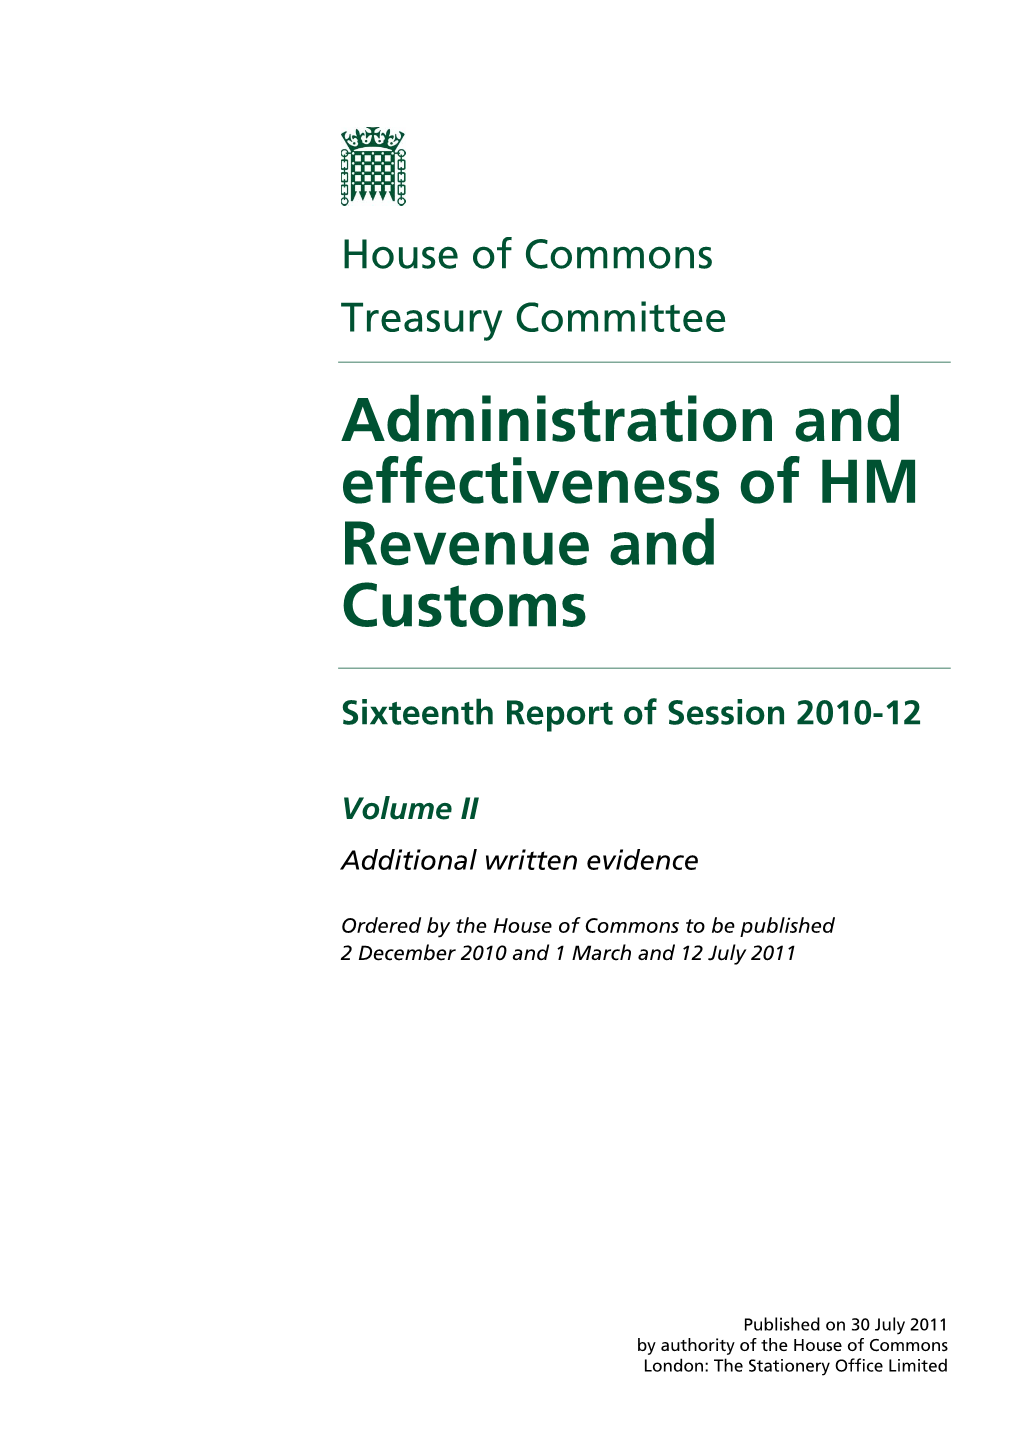 Administration and Effectiveness of HM Revenue and Customs